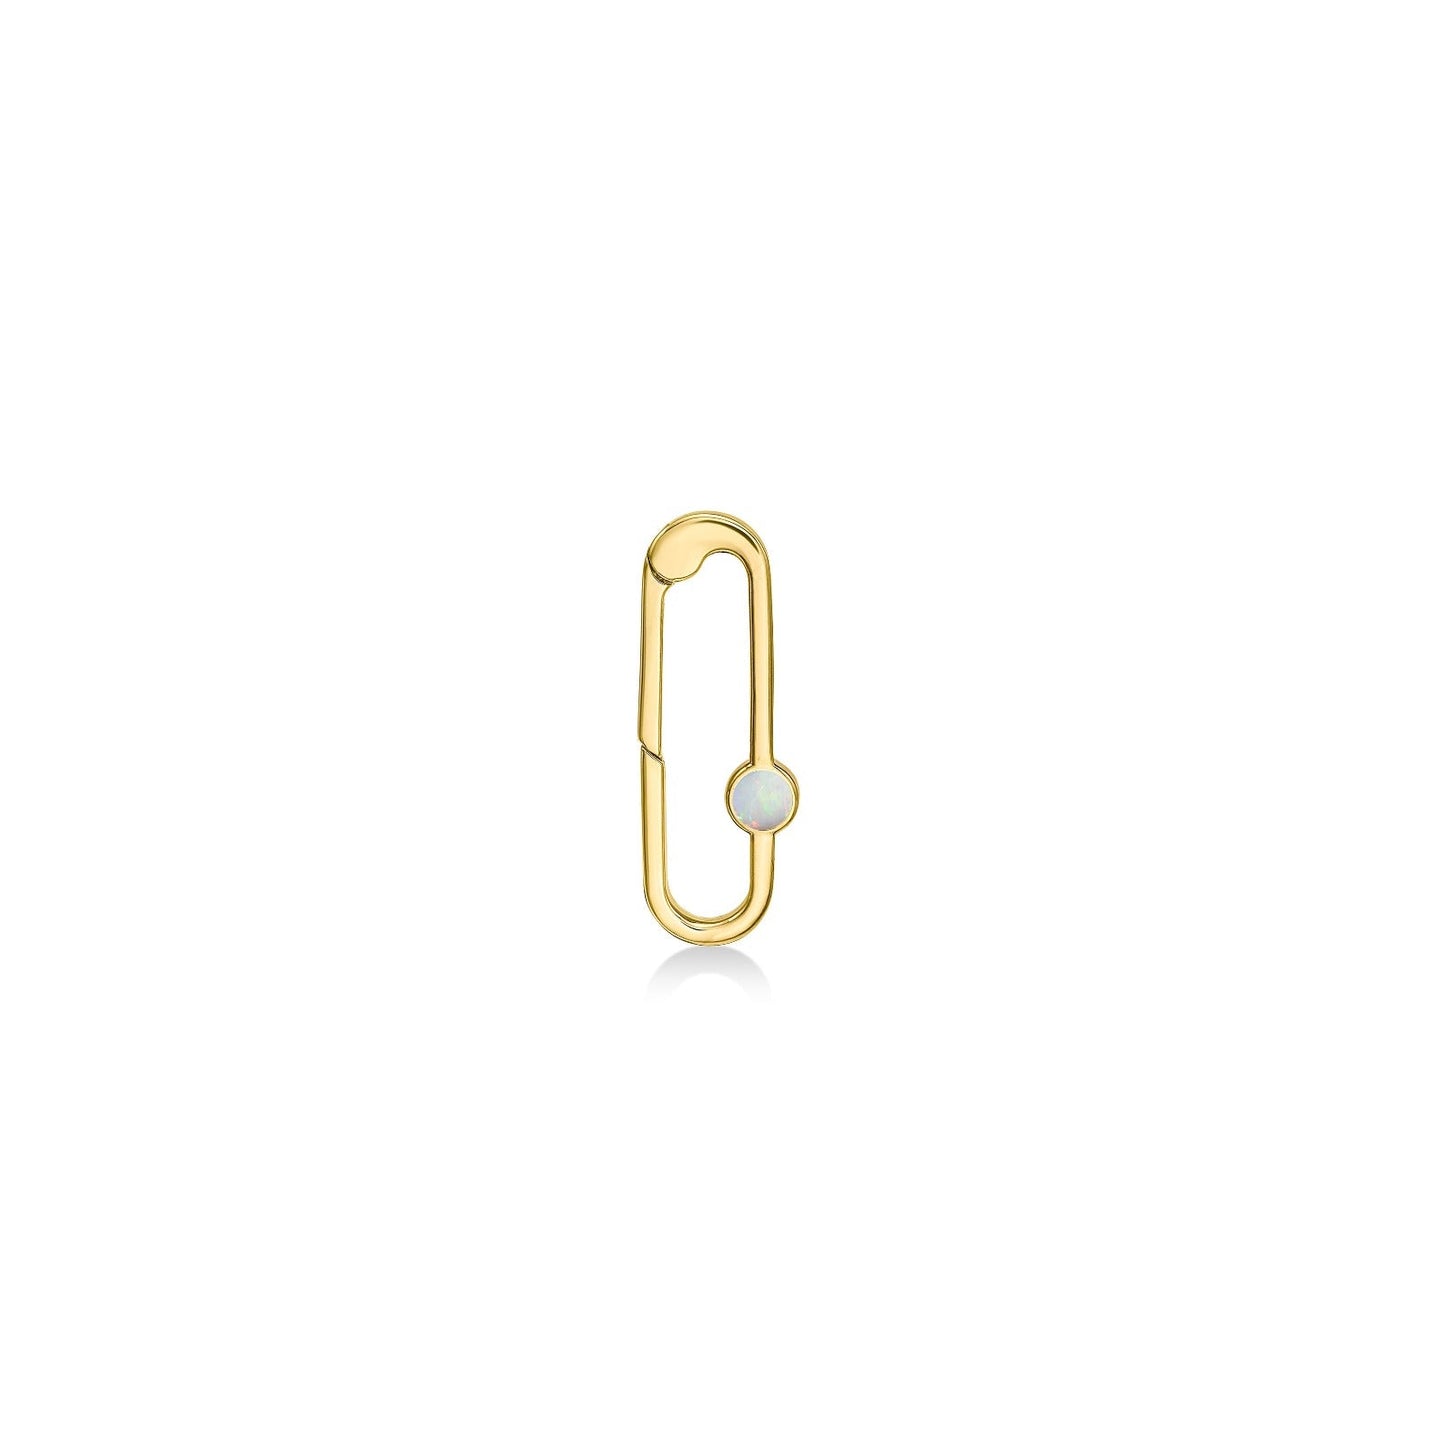 14k gold paperclip charm lock with opal